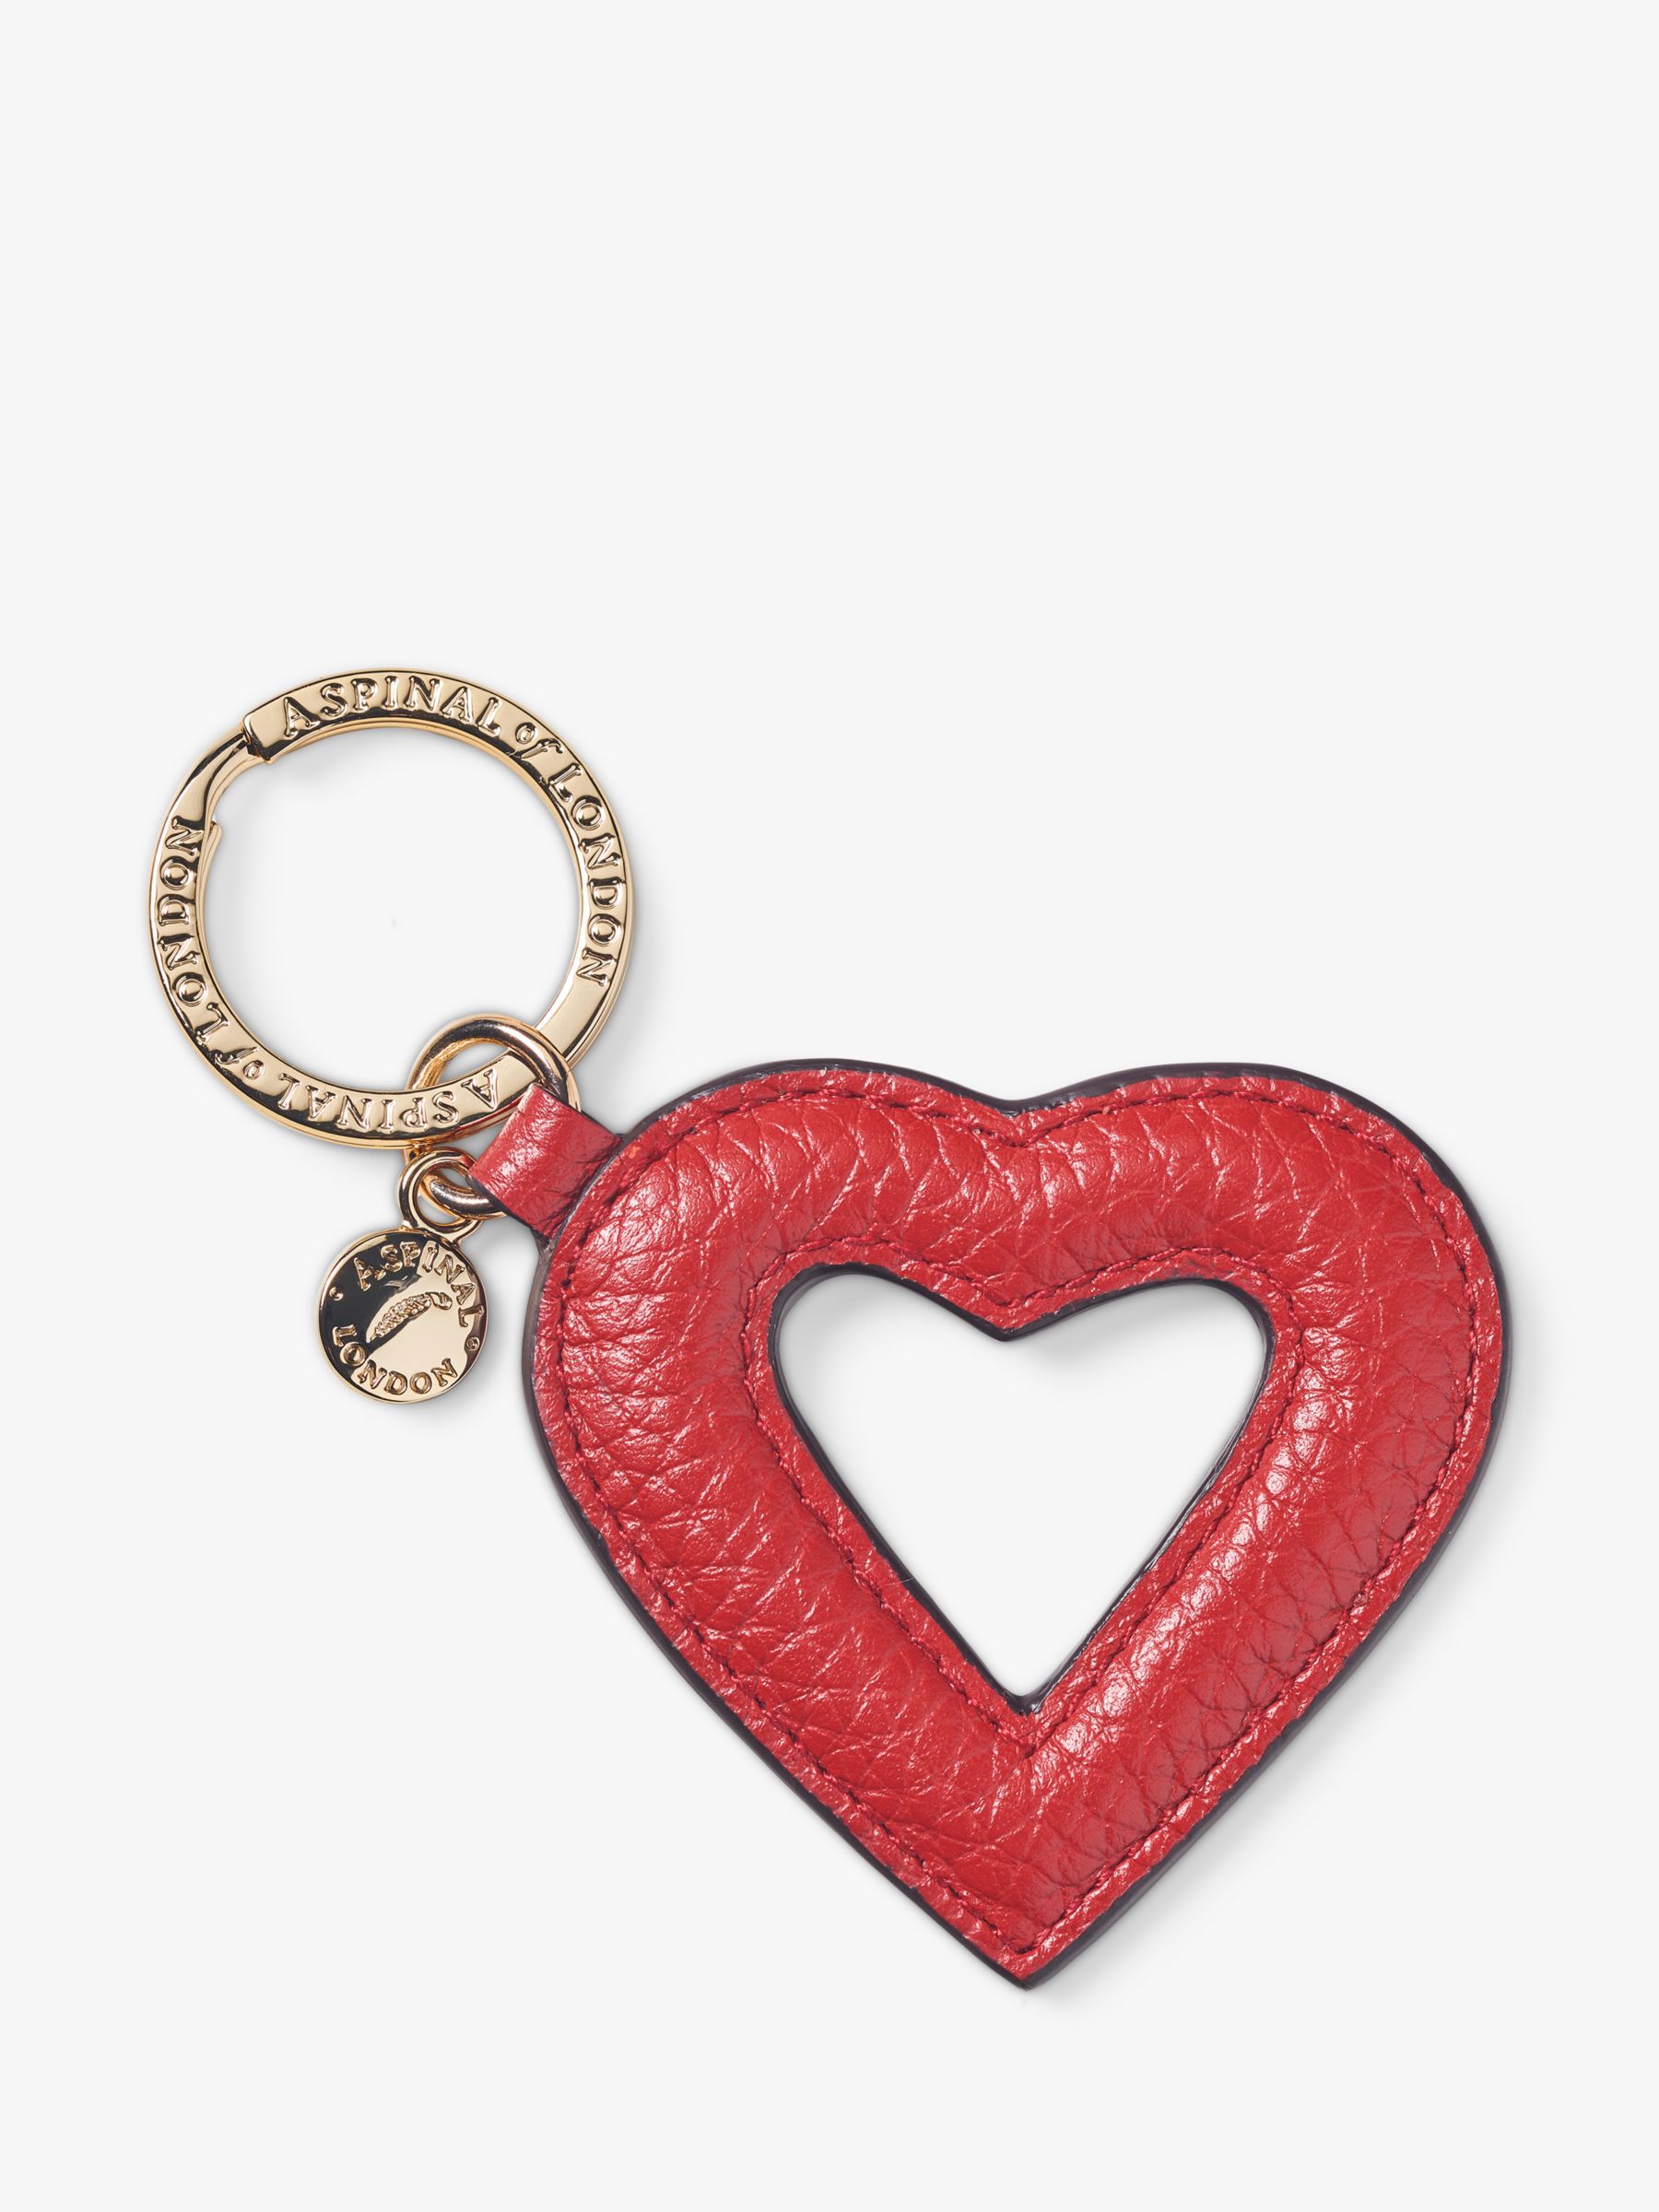 Aspinal of London Small Leather Hollow Heart Keyring, Cardinal Red